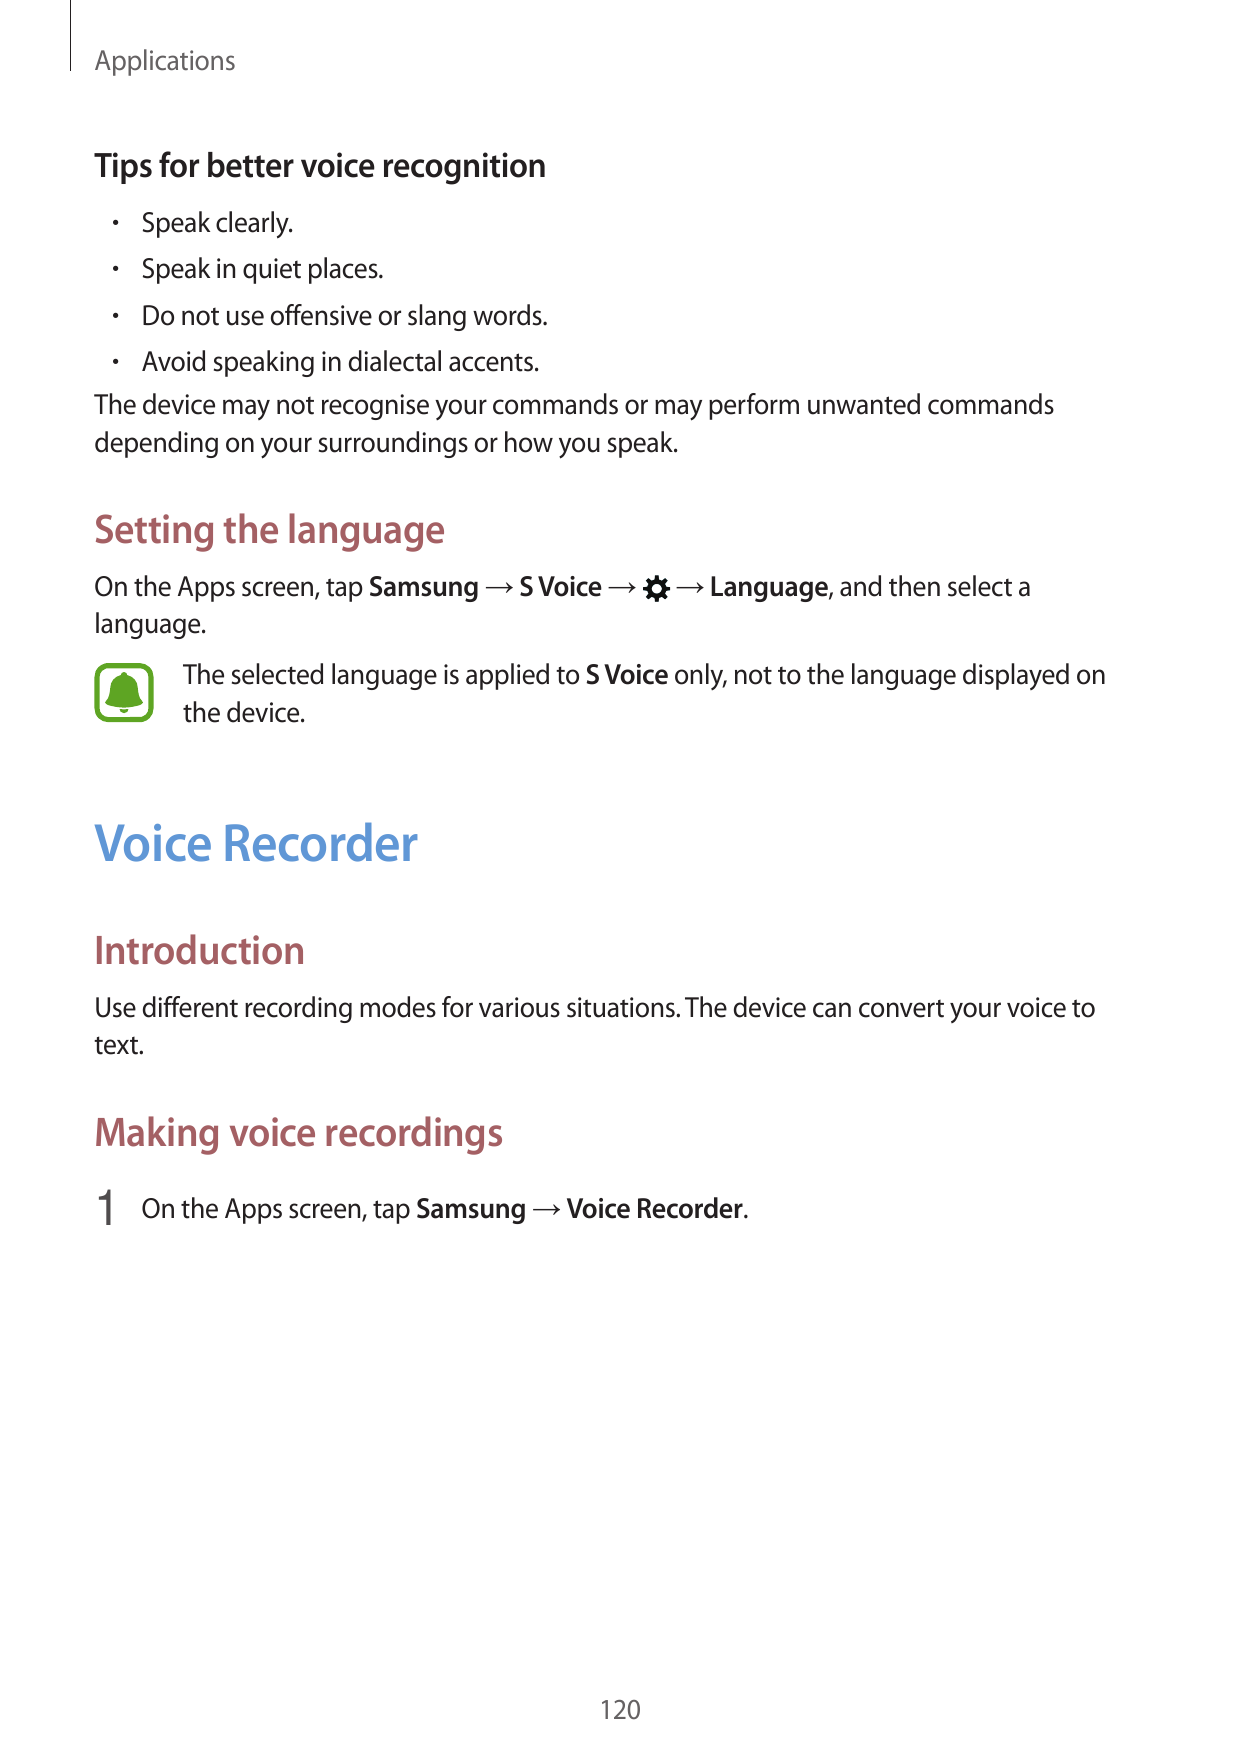 ApplicationsTips for better voice recognition• Speak clearly.• Speak in quiet places.• Do not use offensive or slang words.• Avo